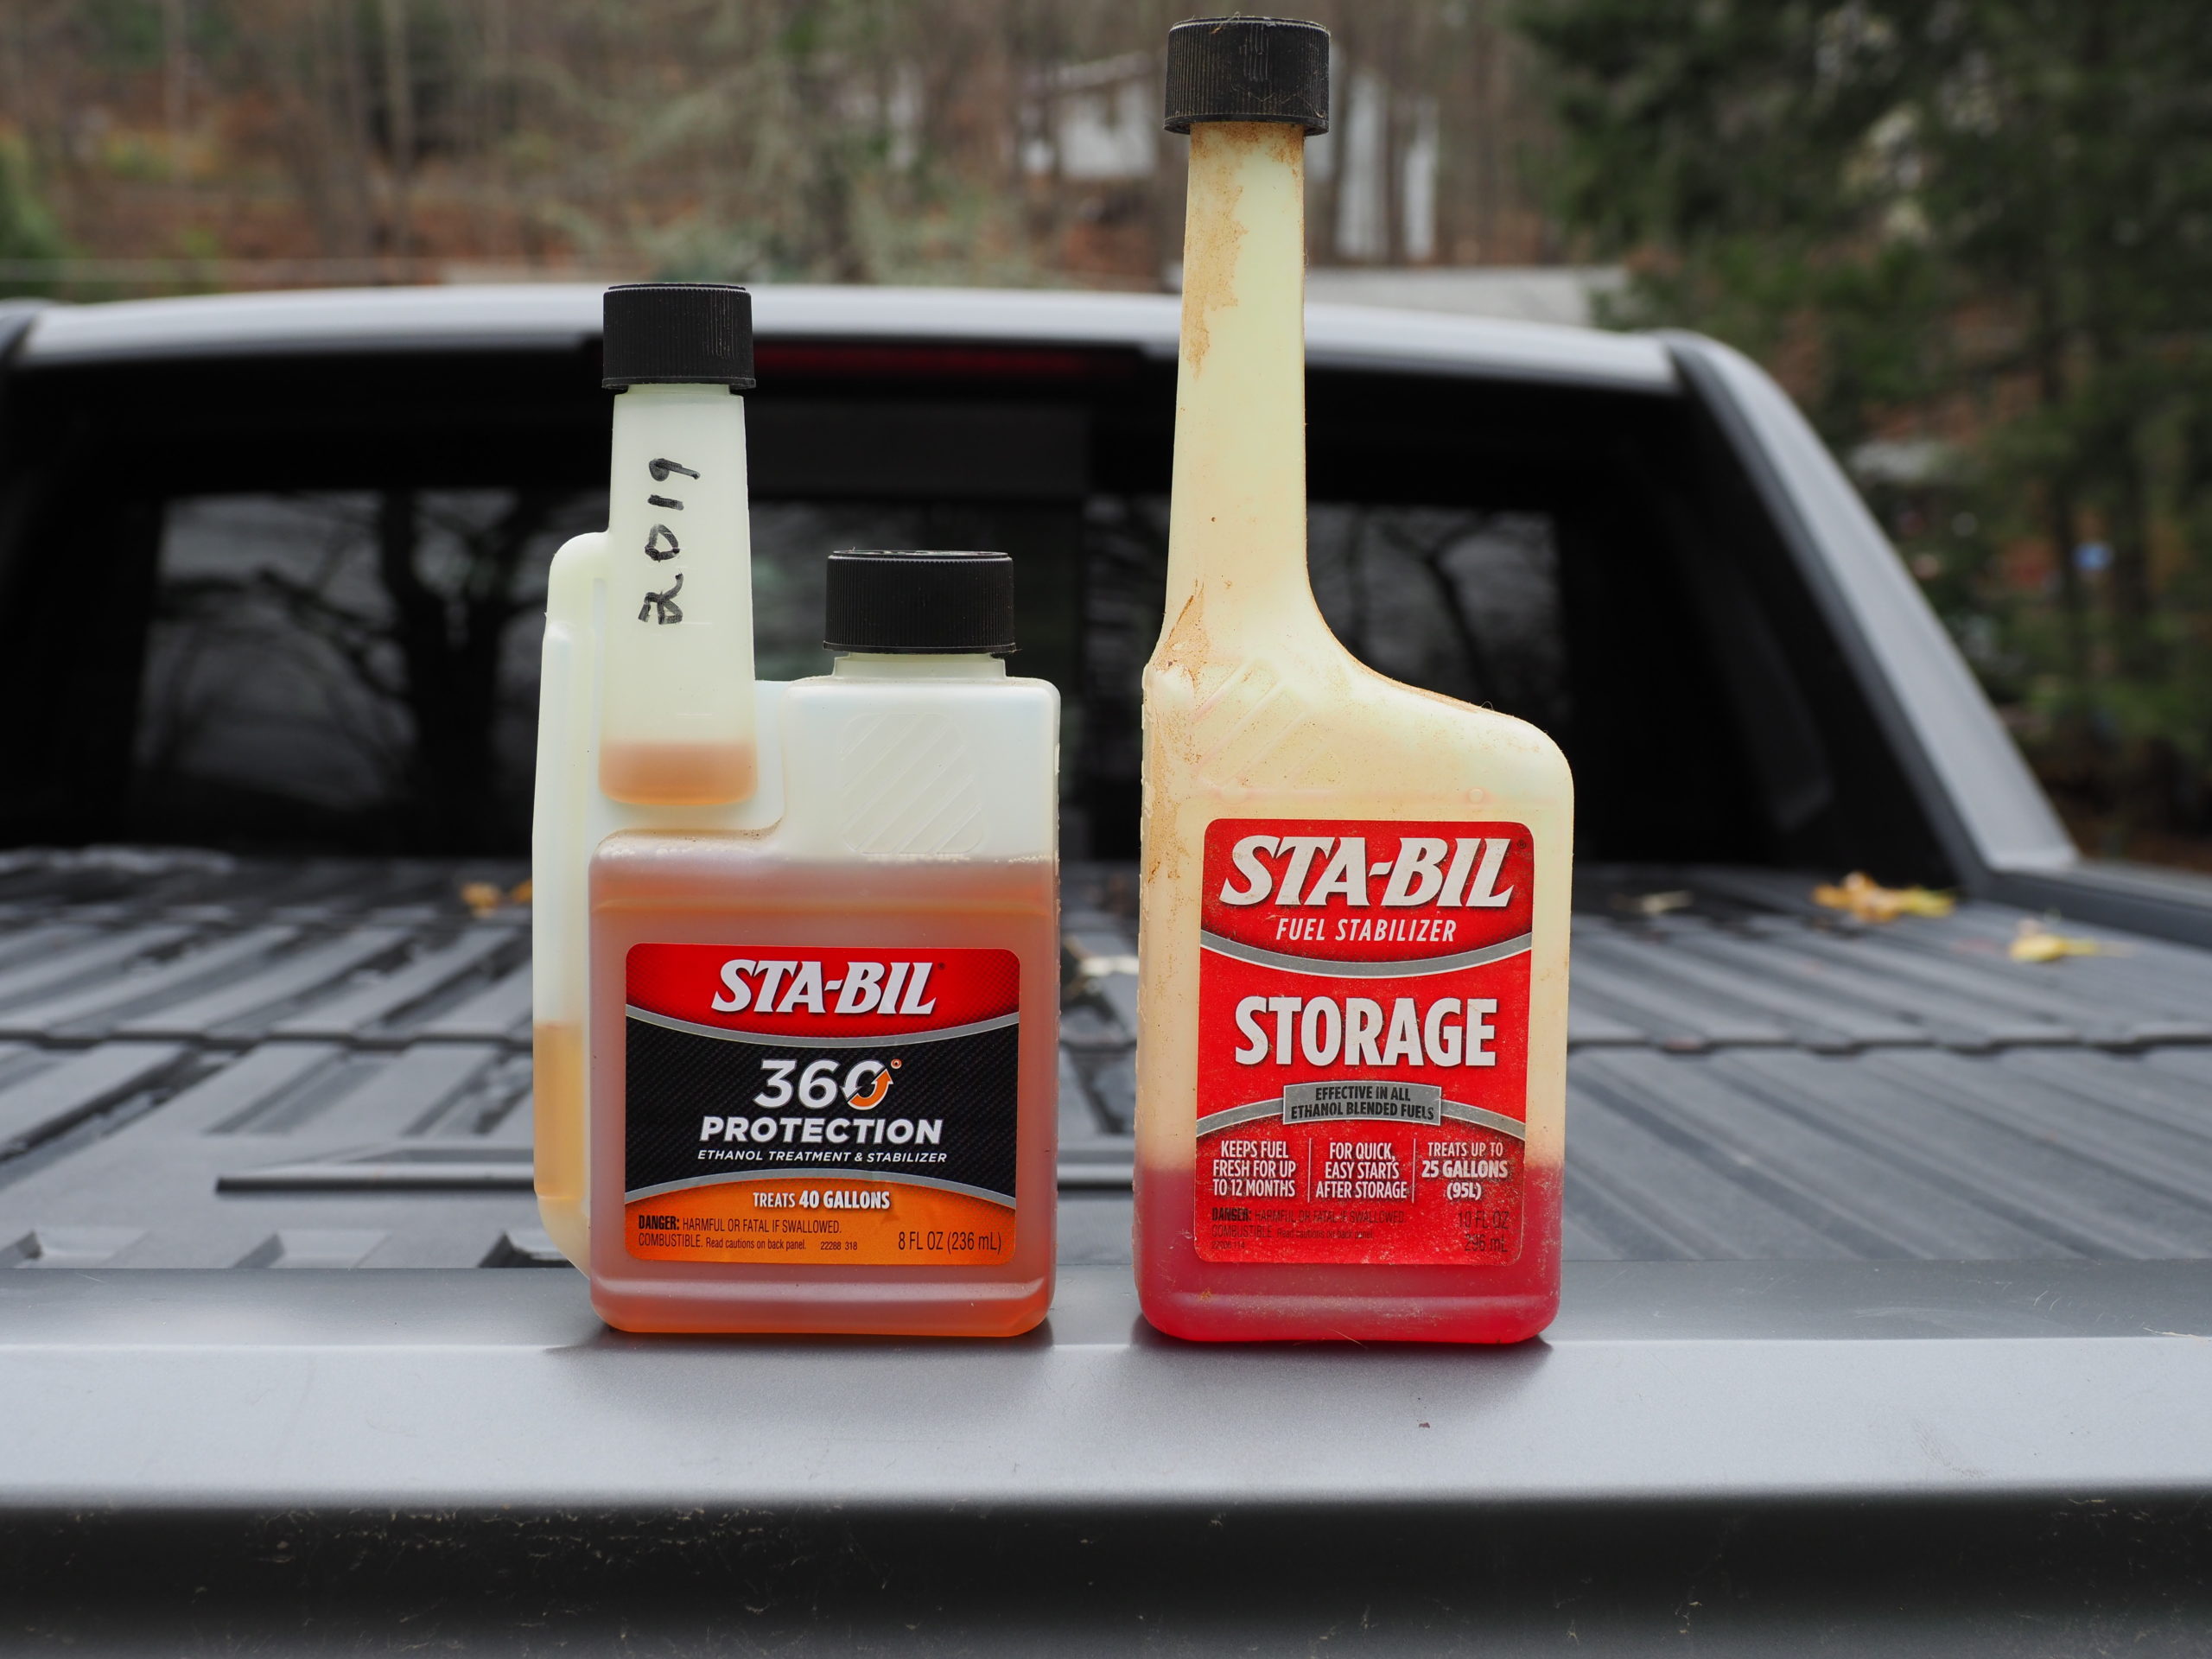 When buying fuel stabilizers you need to know if your engine gasoline is ethanol free (expensive) or from the pump (with 10 percent ethanol). If you pumped the gas, then the product at the left will remove the water from the ethanol gasoline. The product on the right is for ethanol-free gasoline.